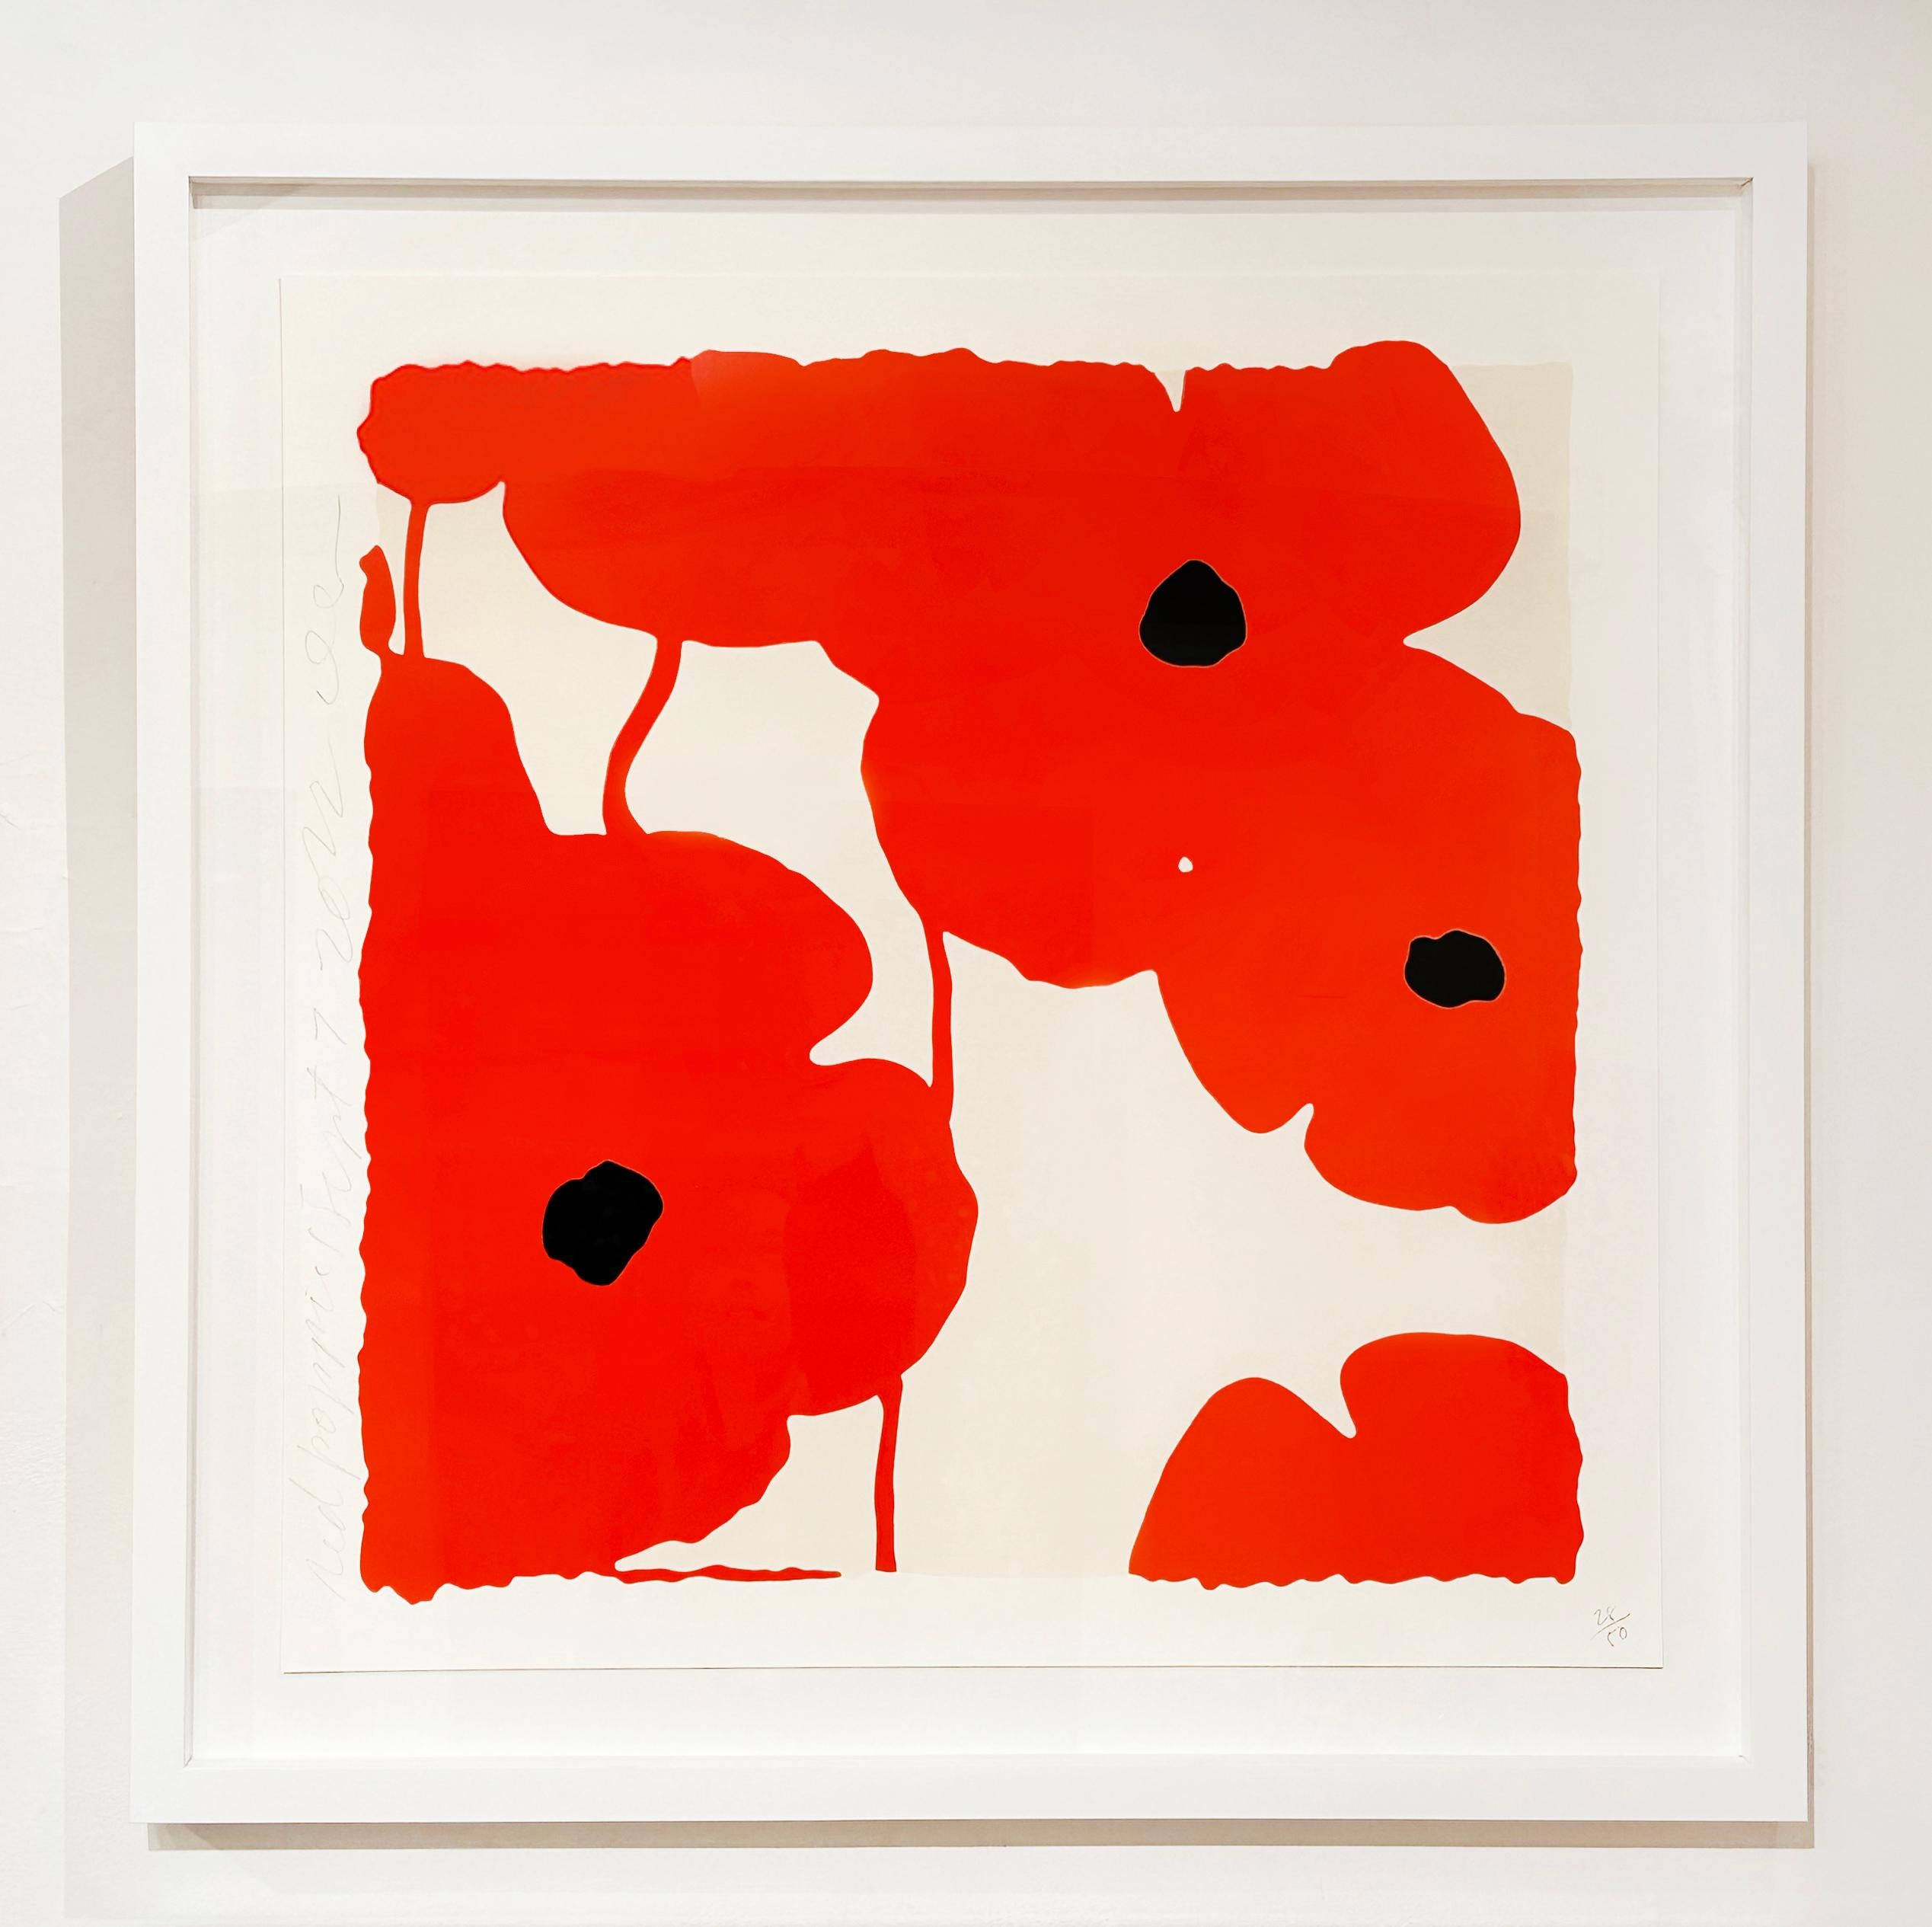 Red Poppies, Sept. 7, 2022 - Contemporary Print by Donald Sultan